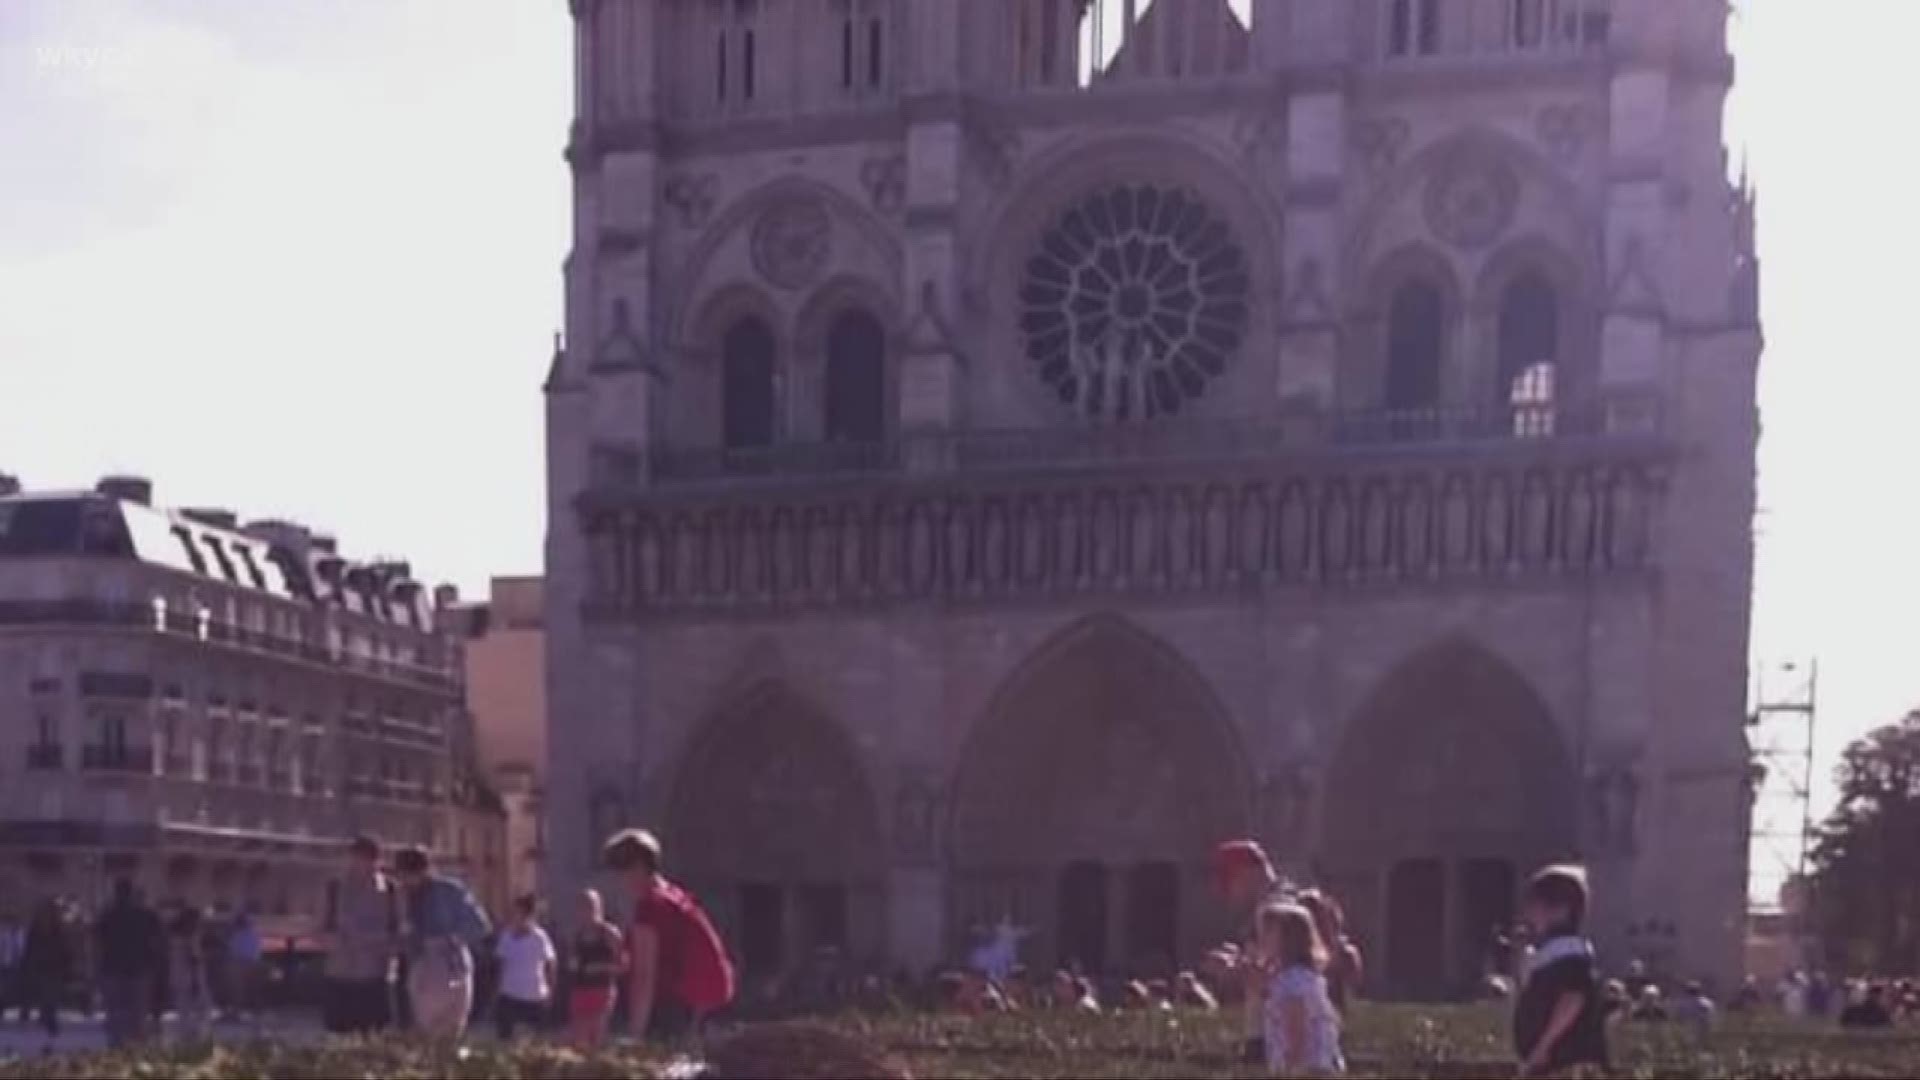 April 16, 2019: 'Breathtaking.' That's how Channel 3's Maureen Kyle explains her experience after visiting the historic Notre Dame cathedral.